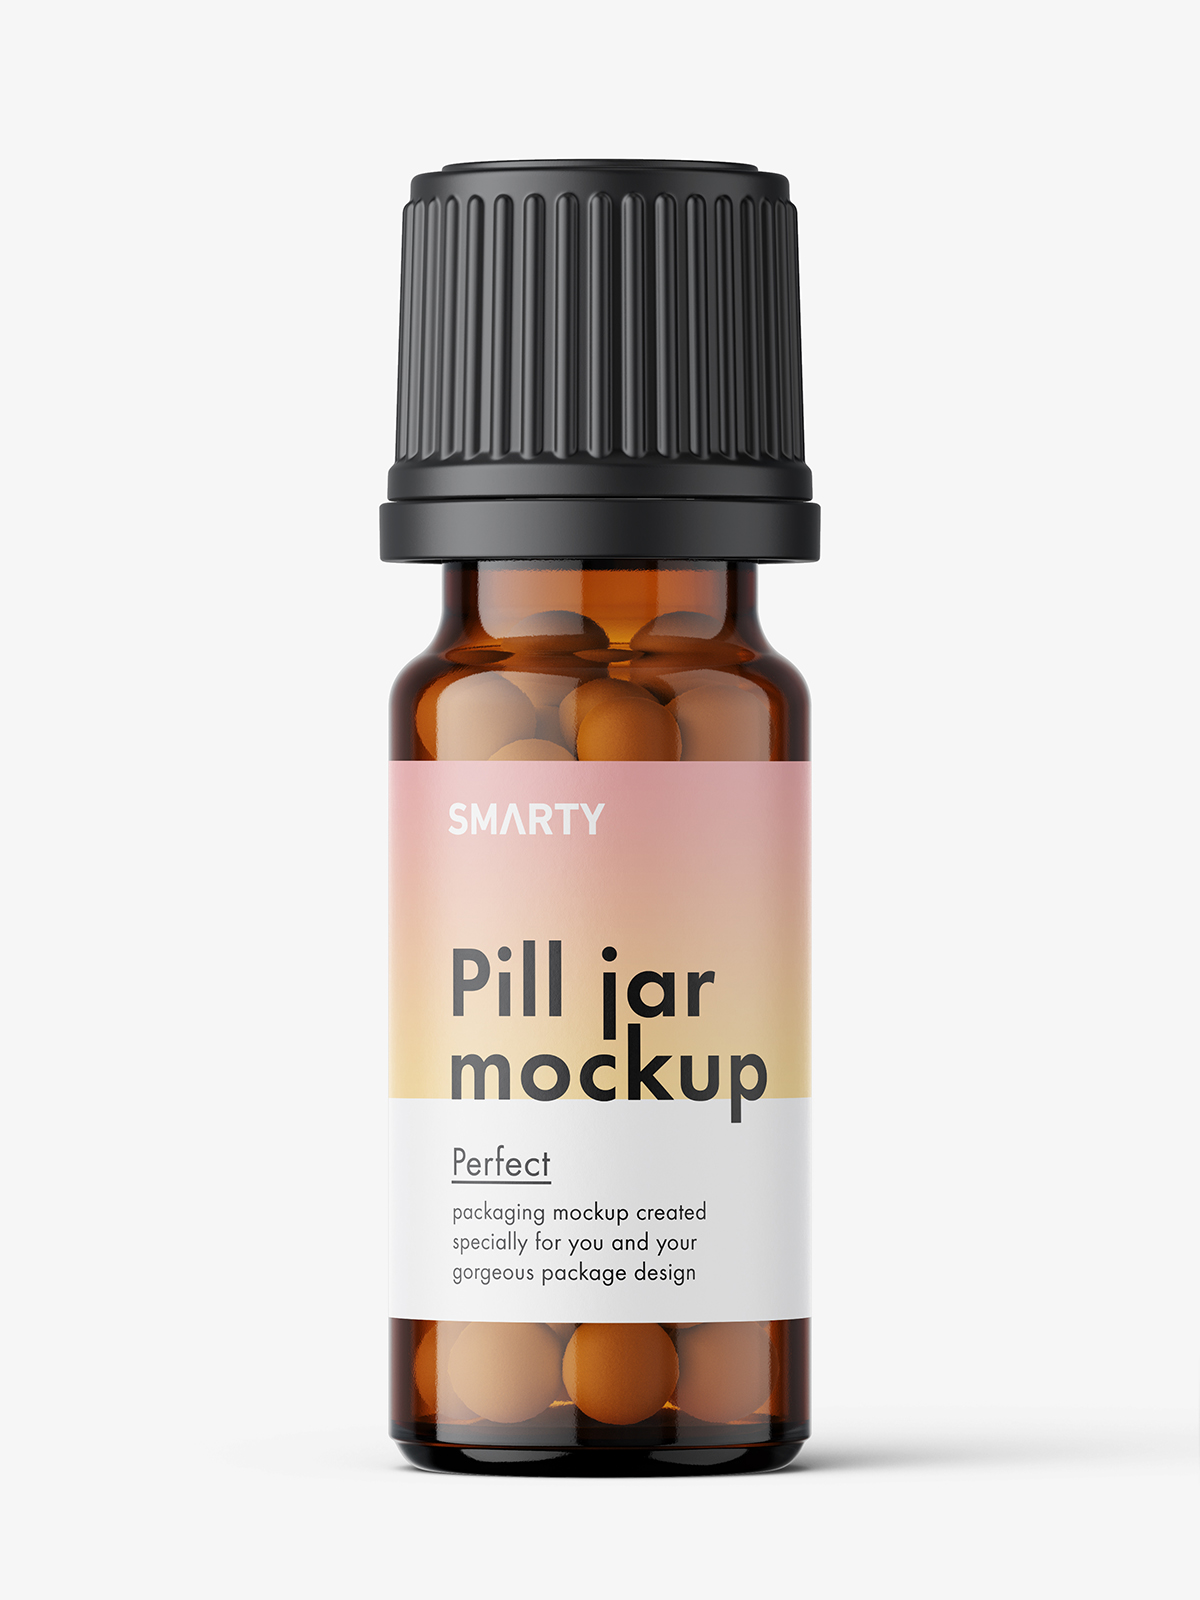 Amber Glass Bottle With Pills Mockup - Free Download Images High